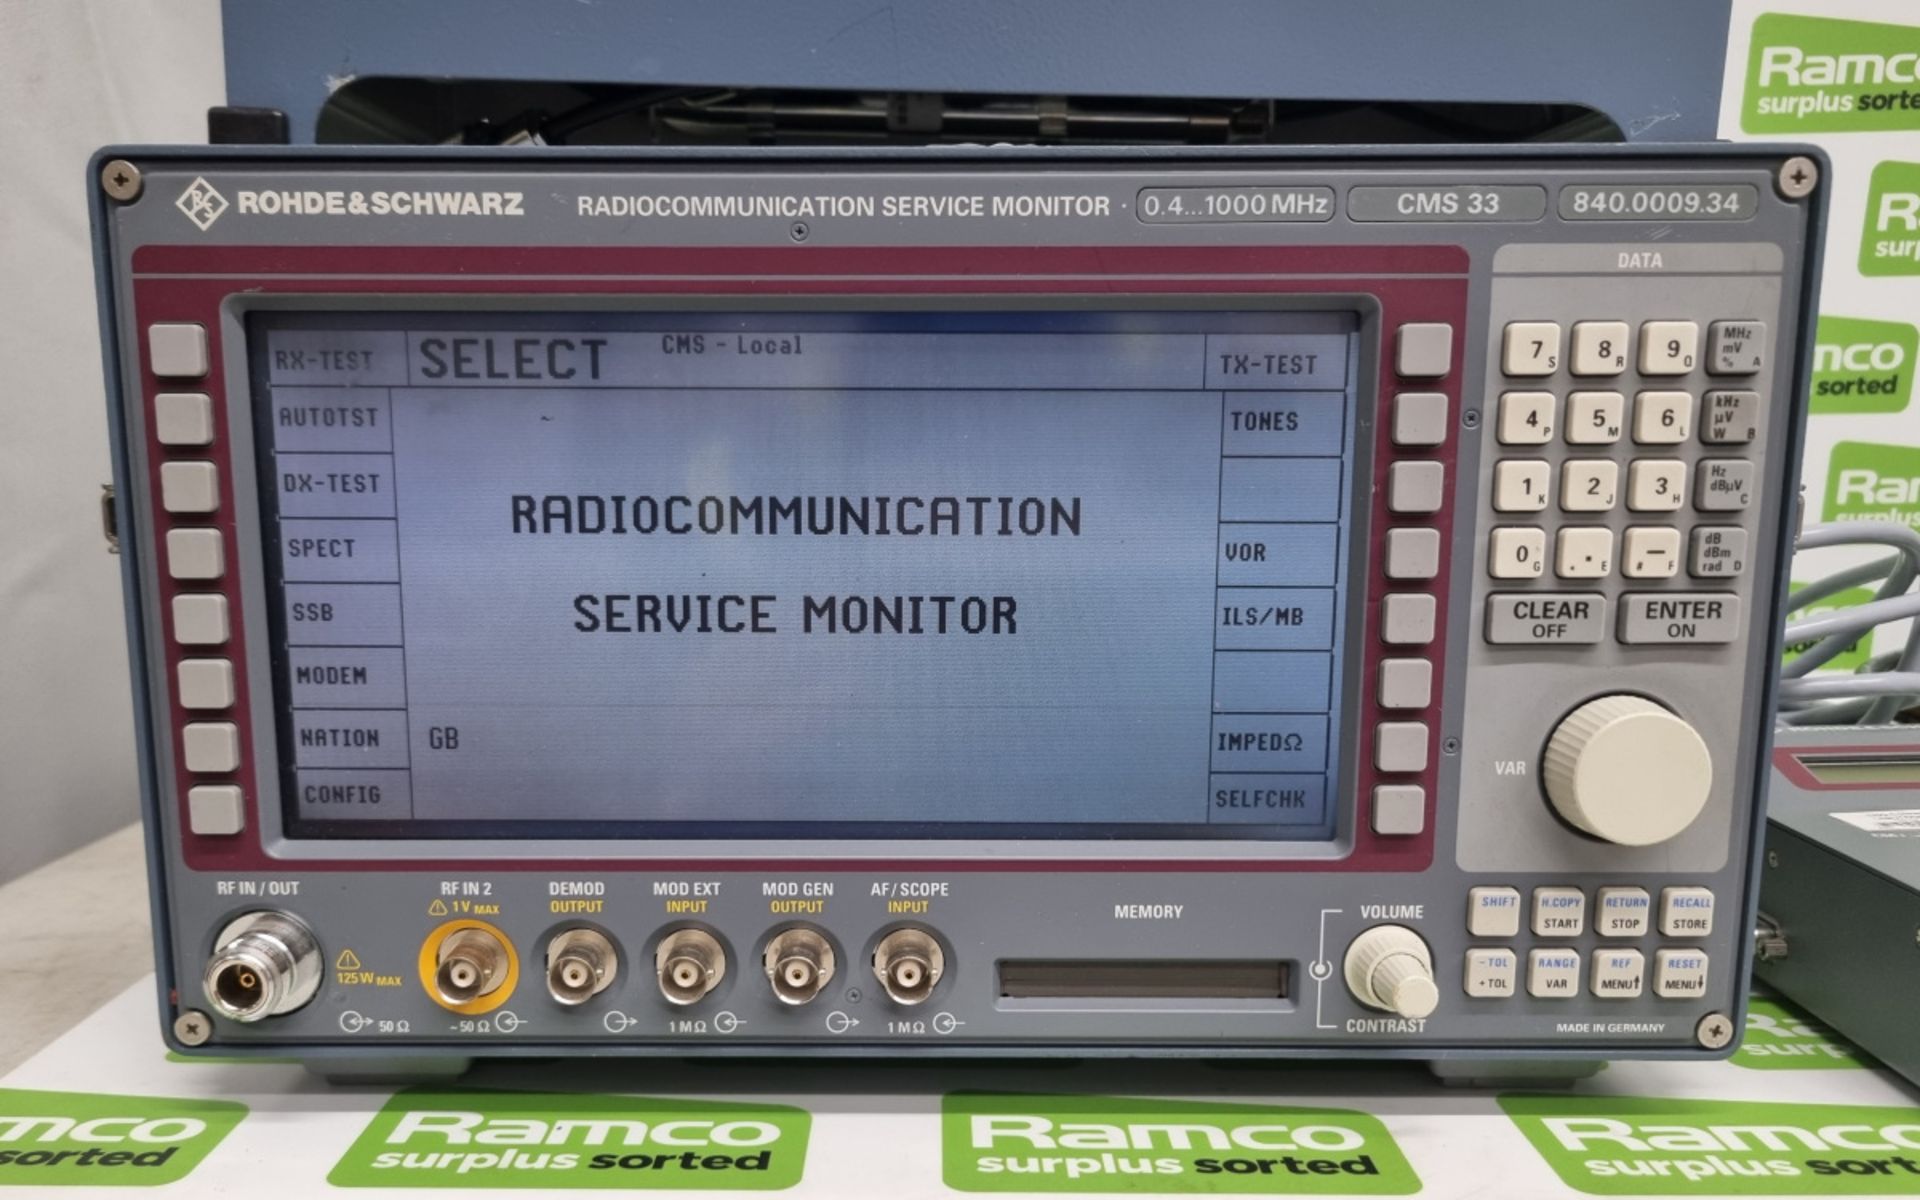 Rohde & Schwarz CMS33 Radiocommunication Service Monitor 0.4 - 1000mhz - 840.0009.34 with carry case - Image 2 of 8